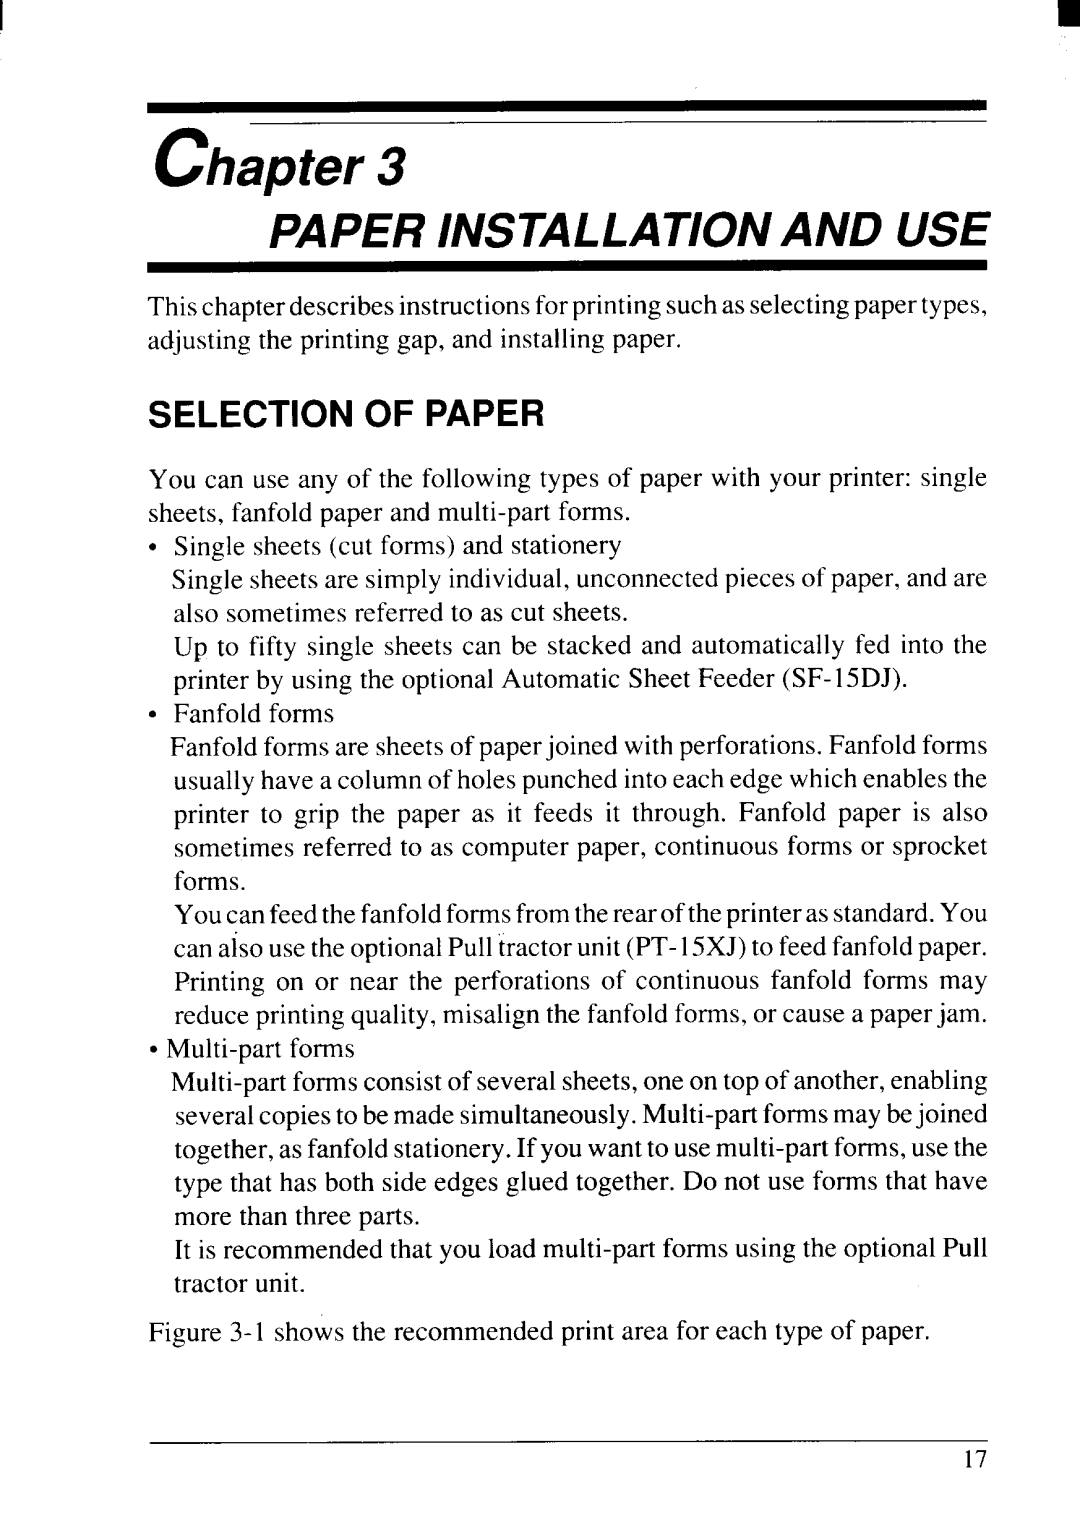 Star Micronics NX-2415II user manual Paper Installation And Use, Selection Of Paper 